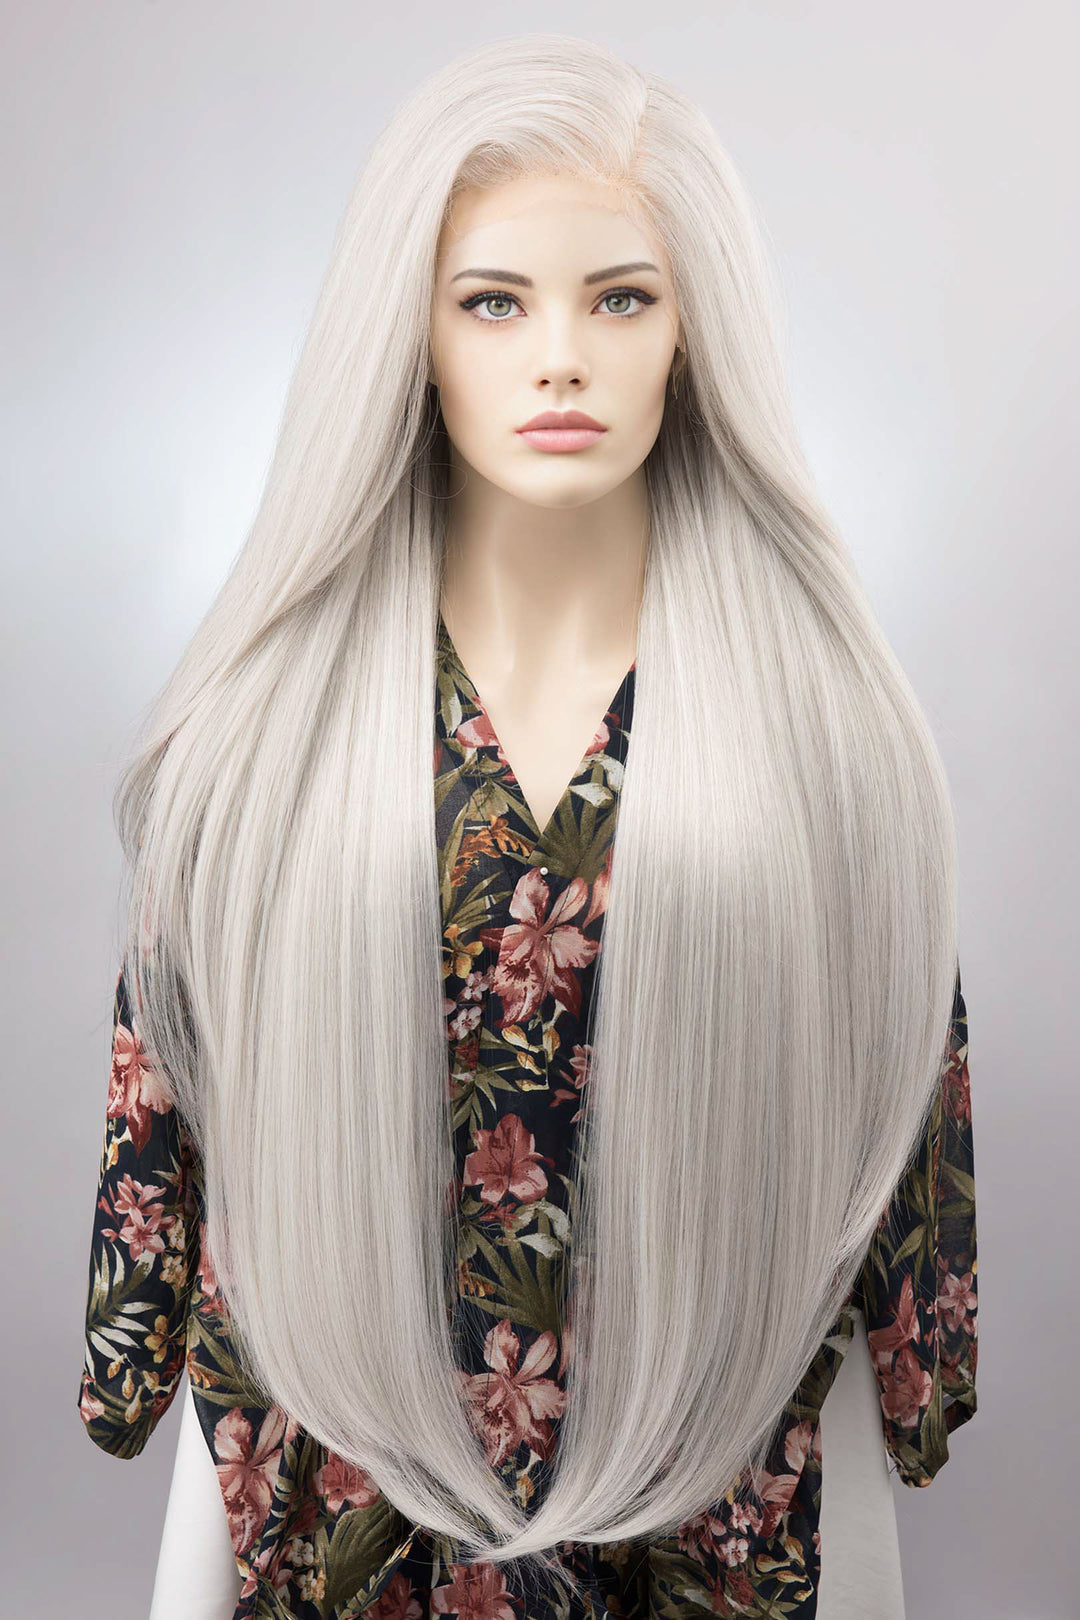 Pearl White Wig Icy Silver Wig White Silver Drag Wig White Blonde Wig White Cosplay Lace Front Wig White Drag Queen Wig Odella